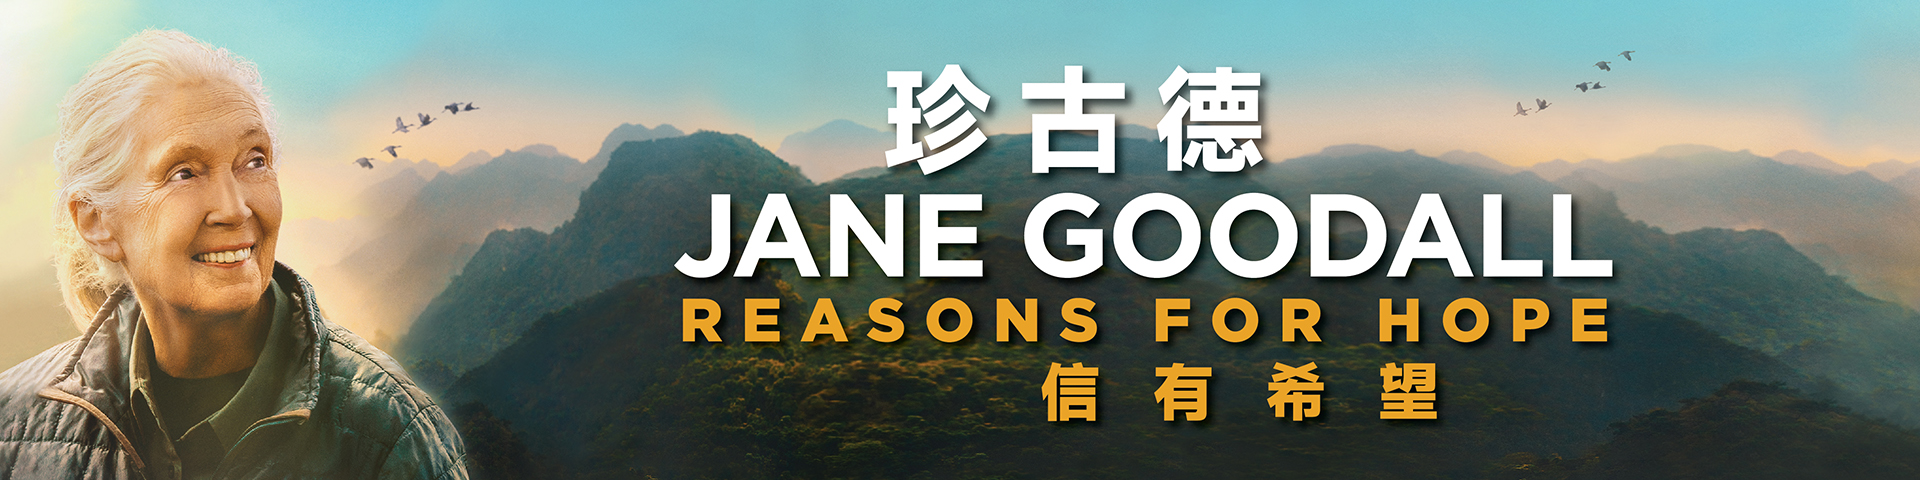 Dome Show - Jane Goodall - Reasons for Hope